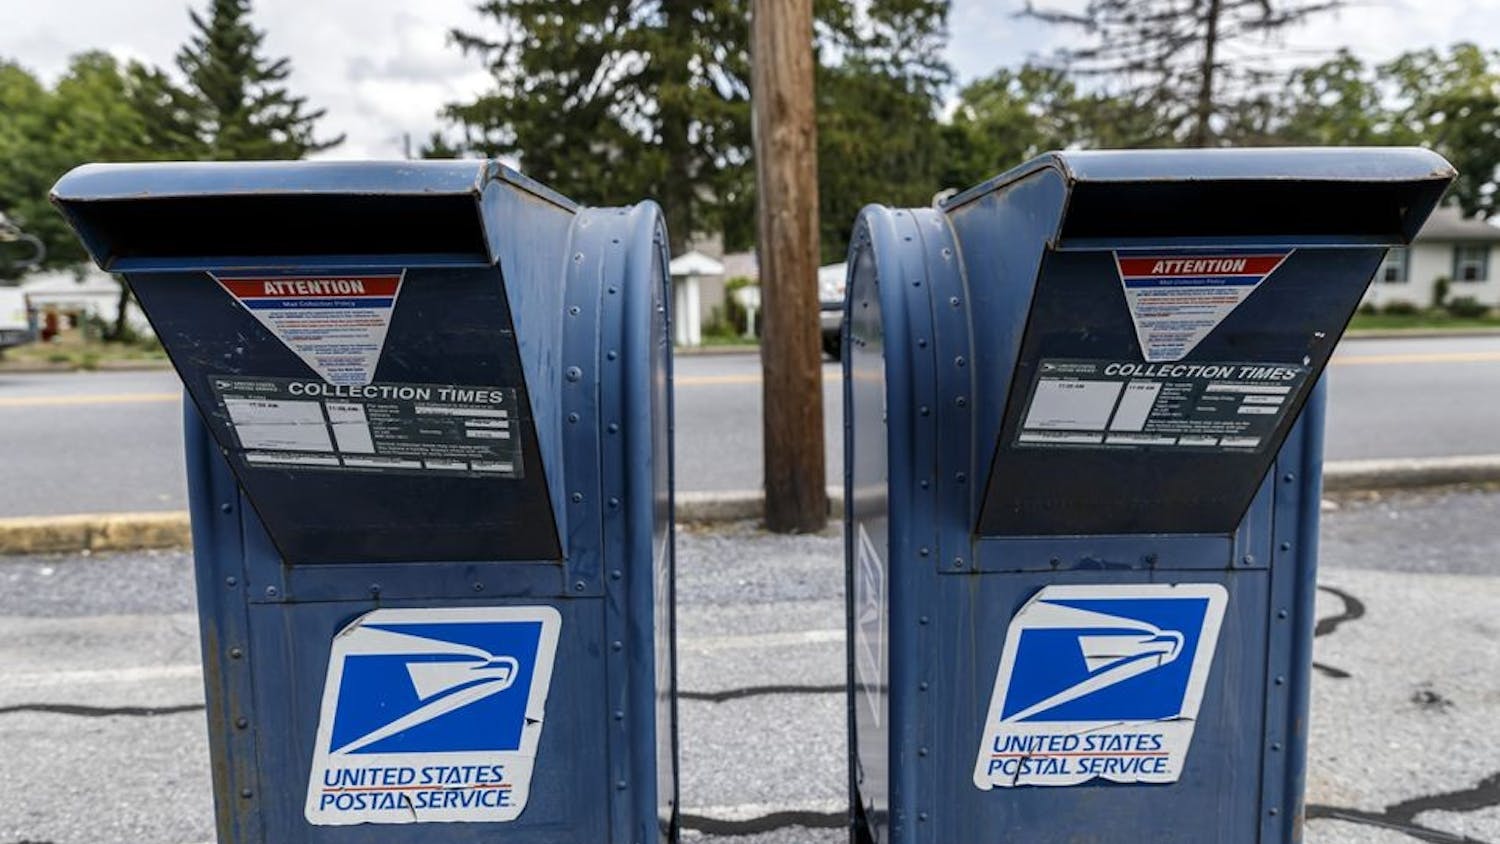 United States Postal Service mail collection boxes sit on a sidewalk in Pennsylvania.